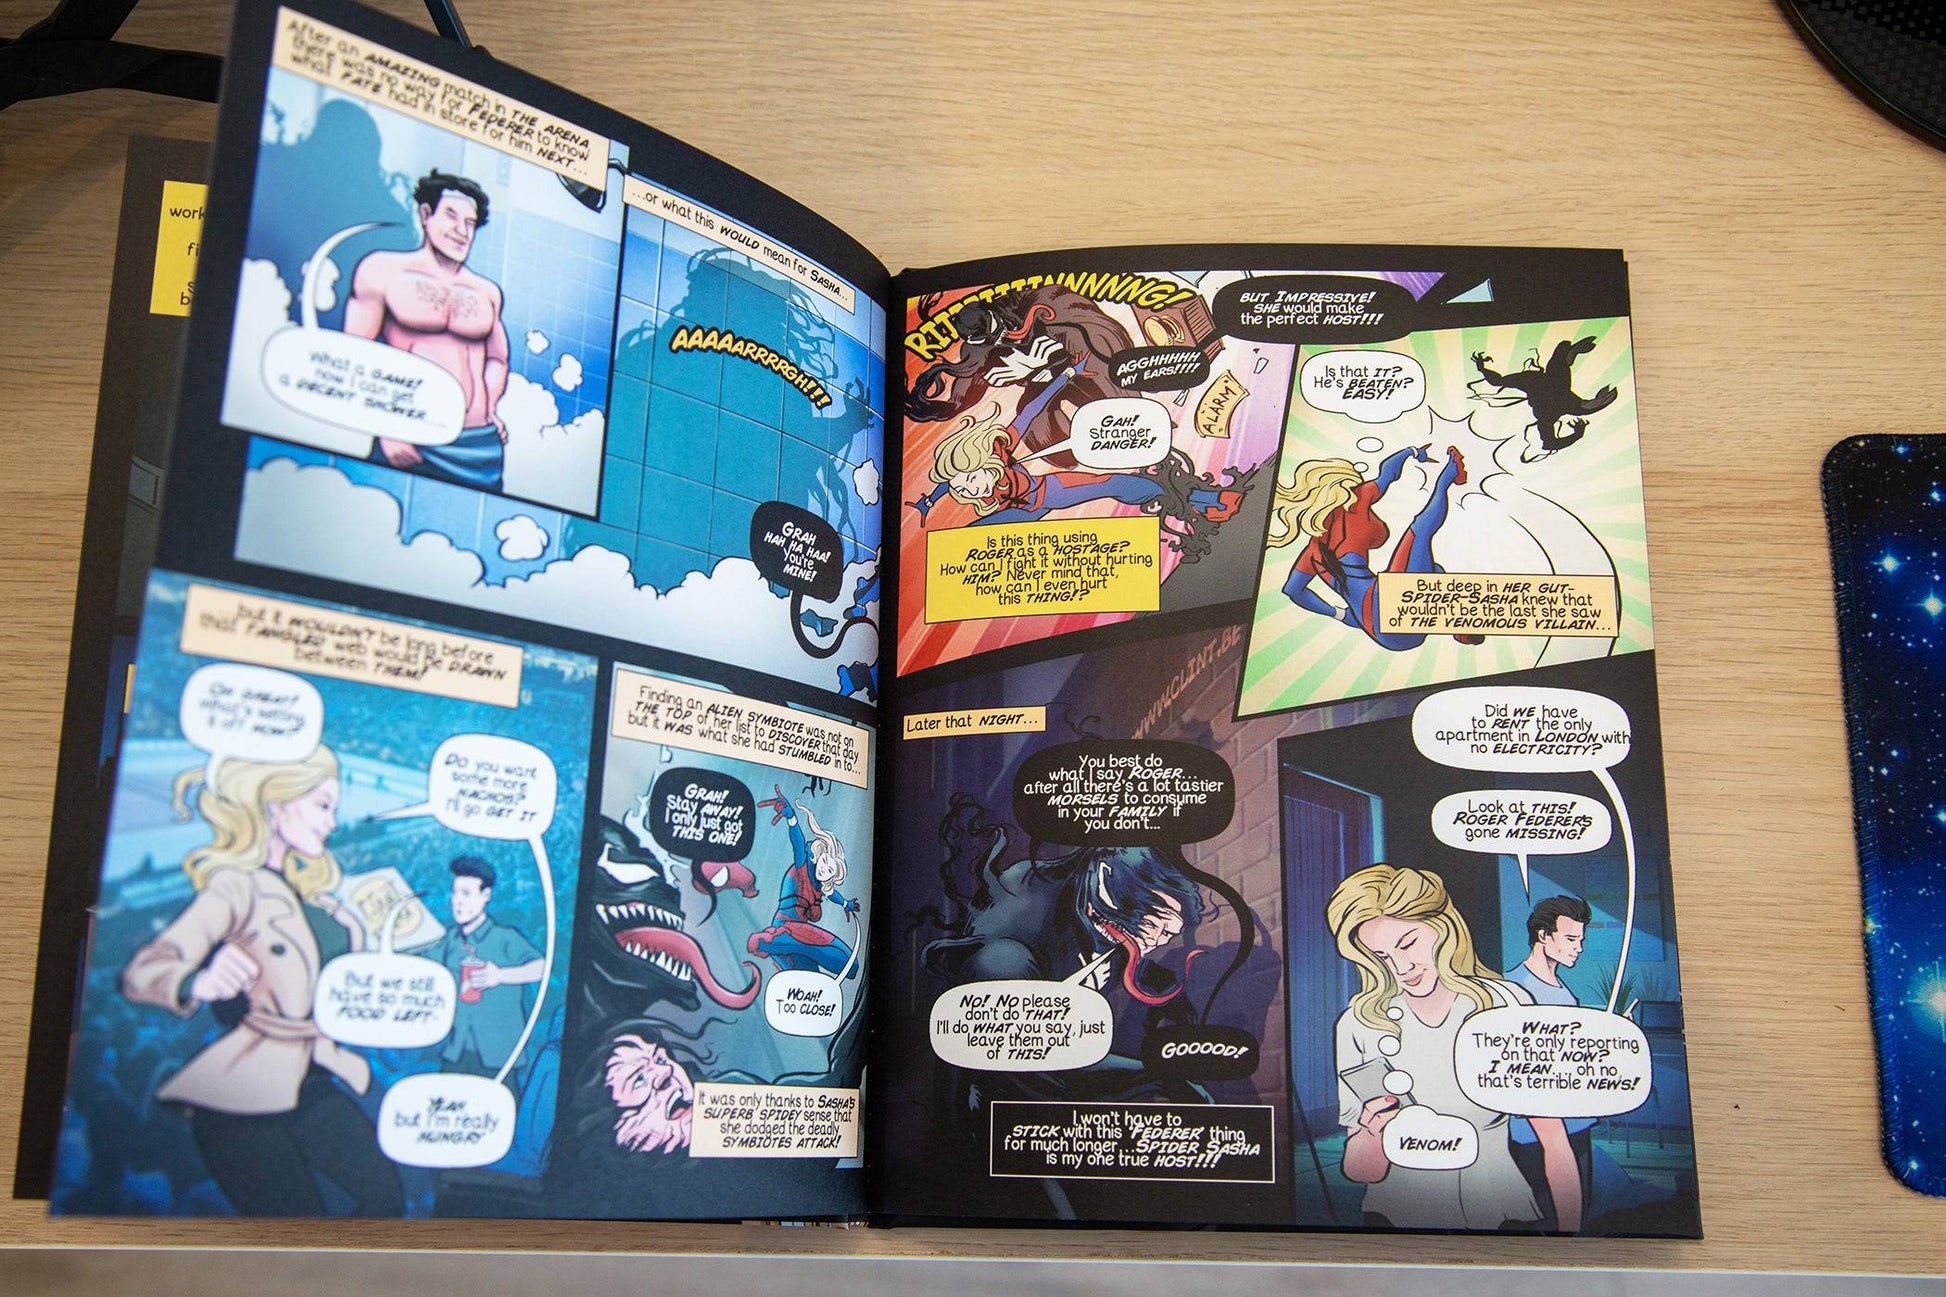 Personalized One Of A Kind Comic Book - Customized Cartoon Story - High Quality Luxury Gift - Make Me A Comic Ltd